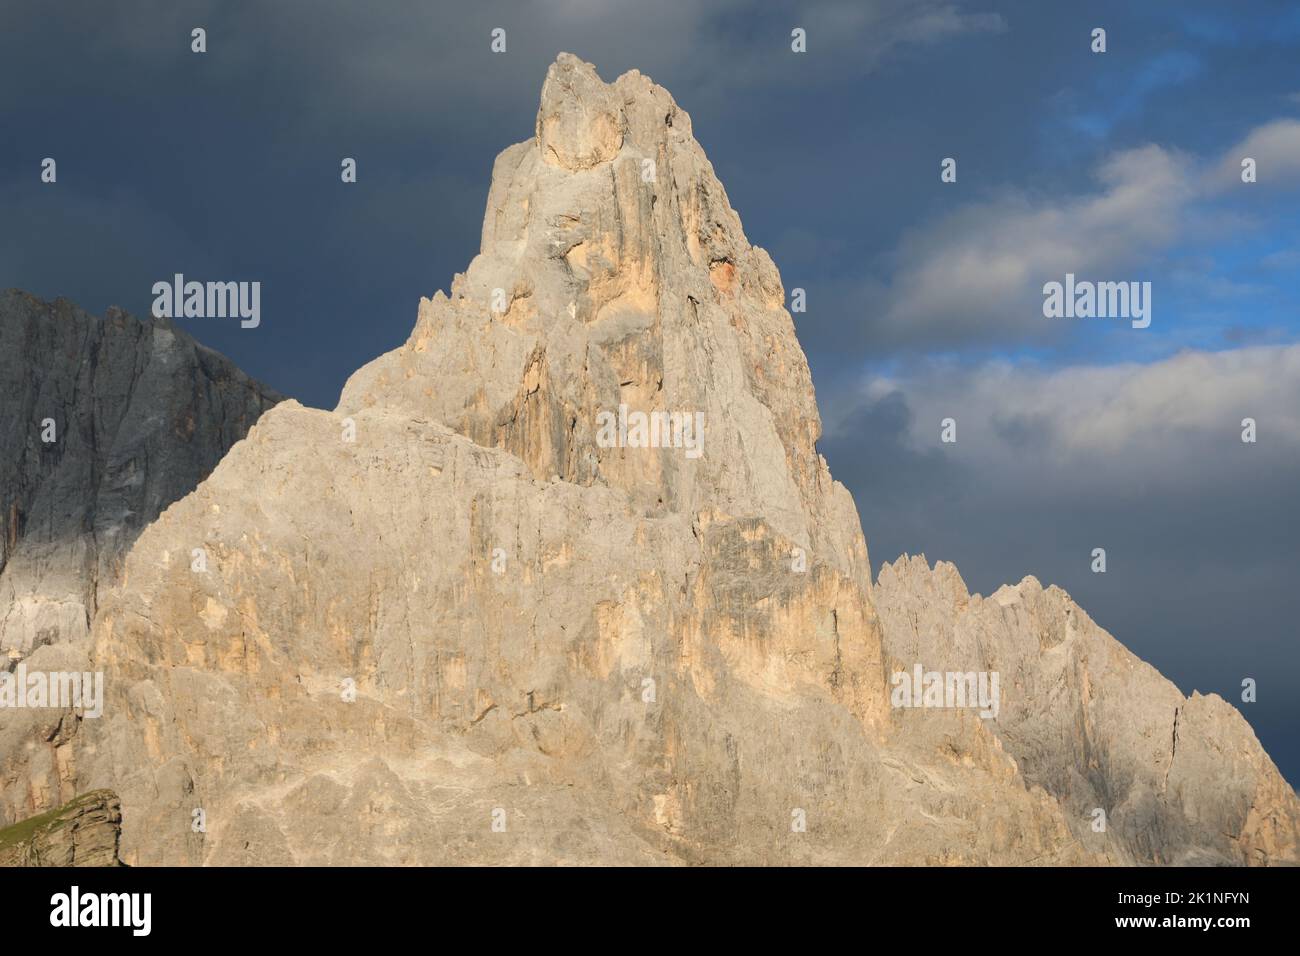 European Alps and the CIMON DELLA PALA Mountain in Italy at sunset Stock Photo